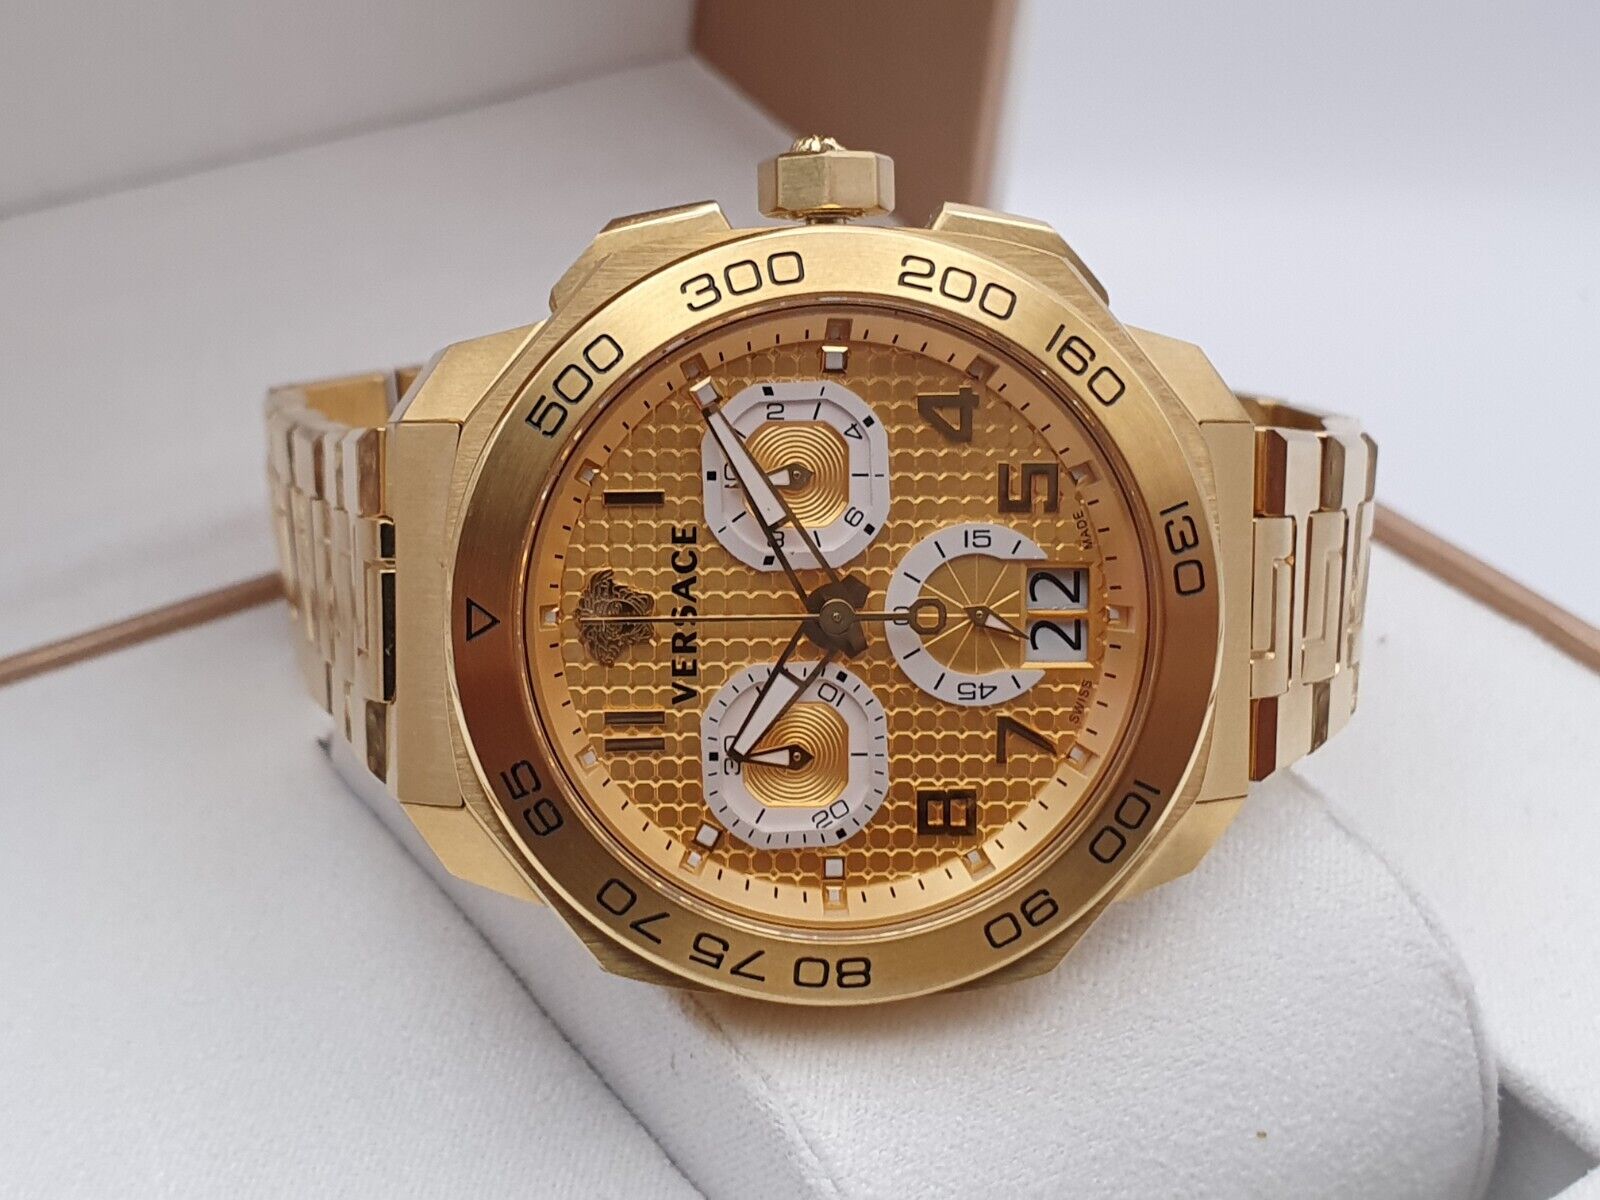 Versace Dylos Chronograph Gold Dial Gold Steel Strap Watch for Men - VQC040015